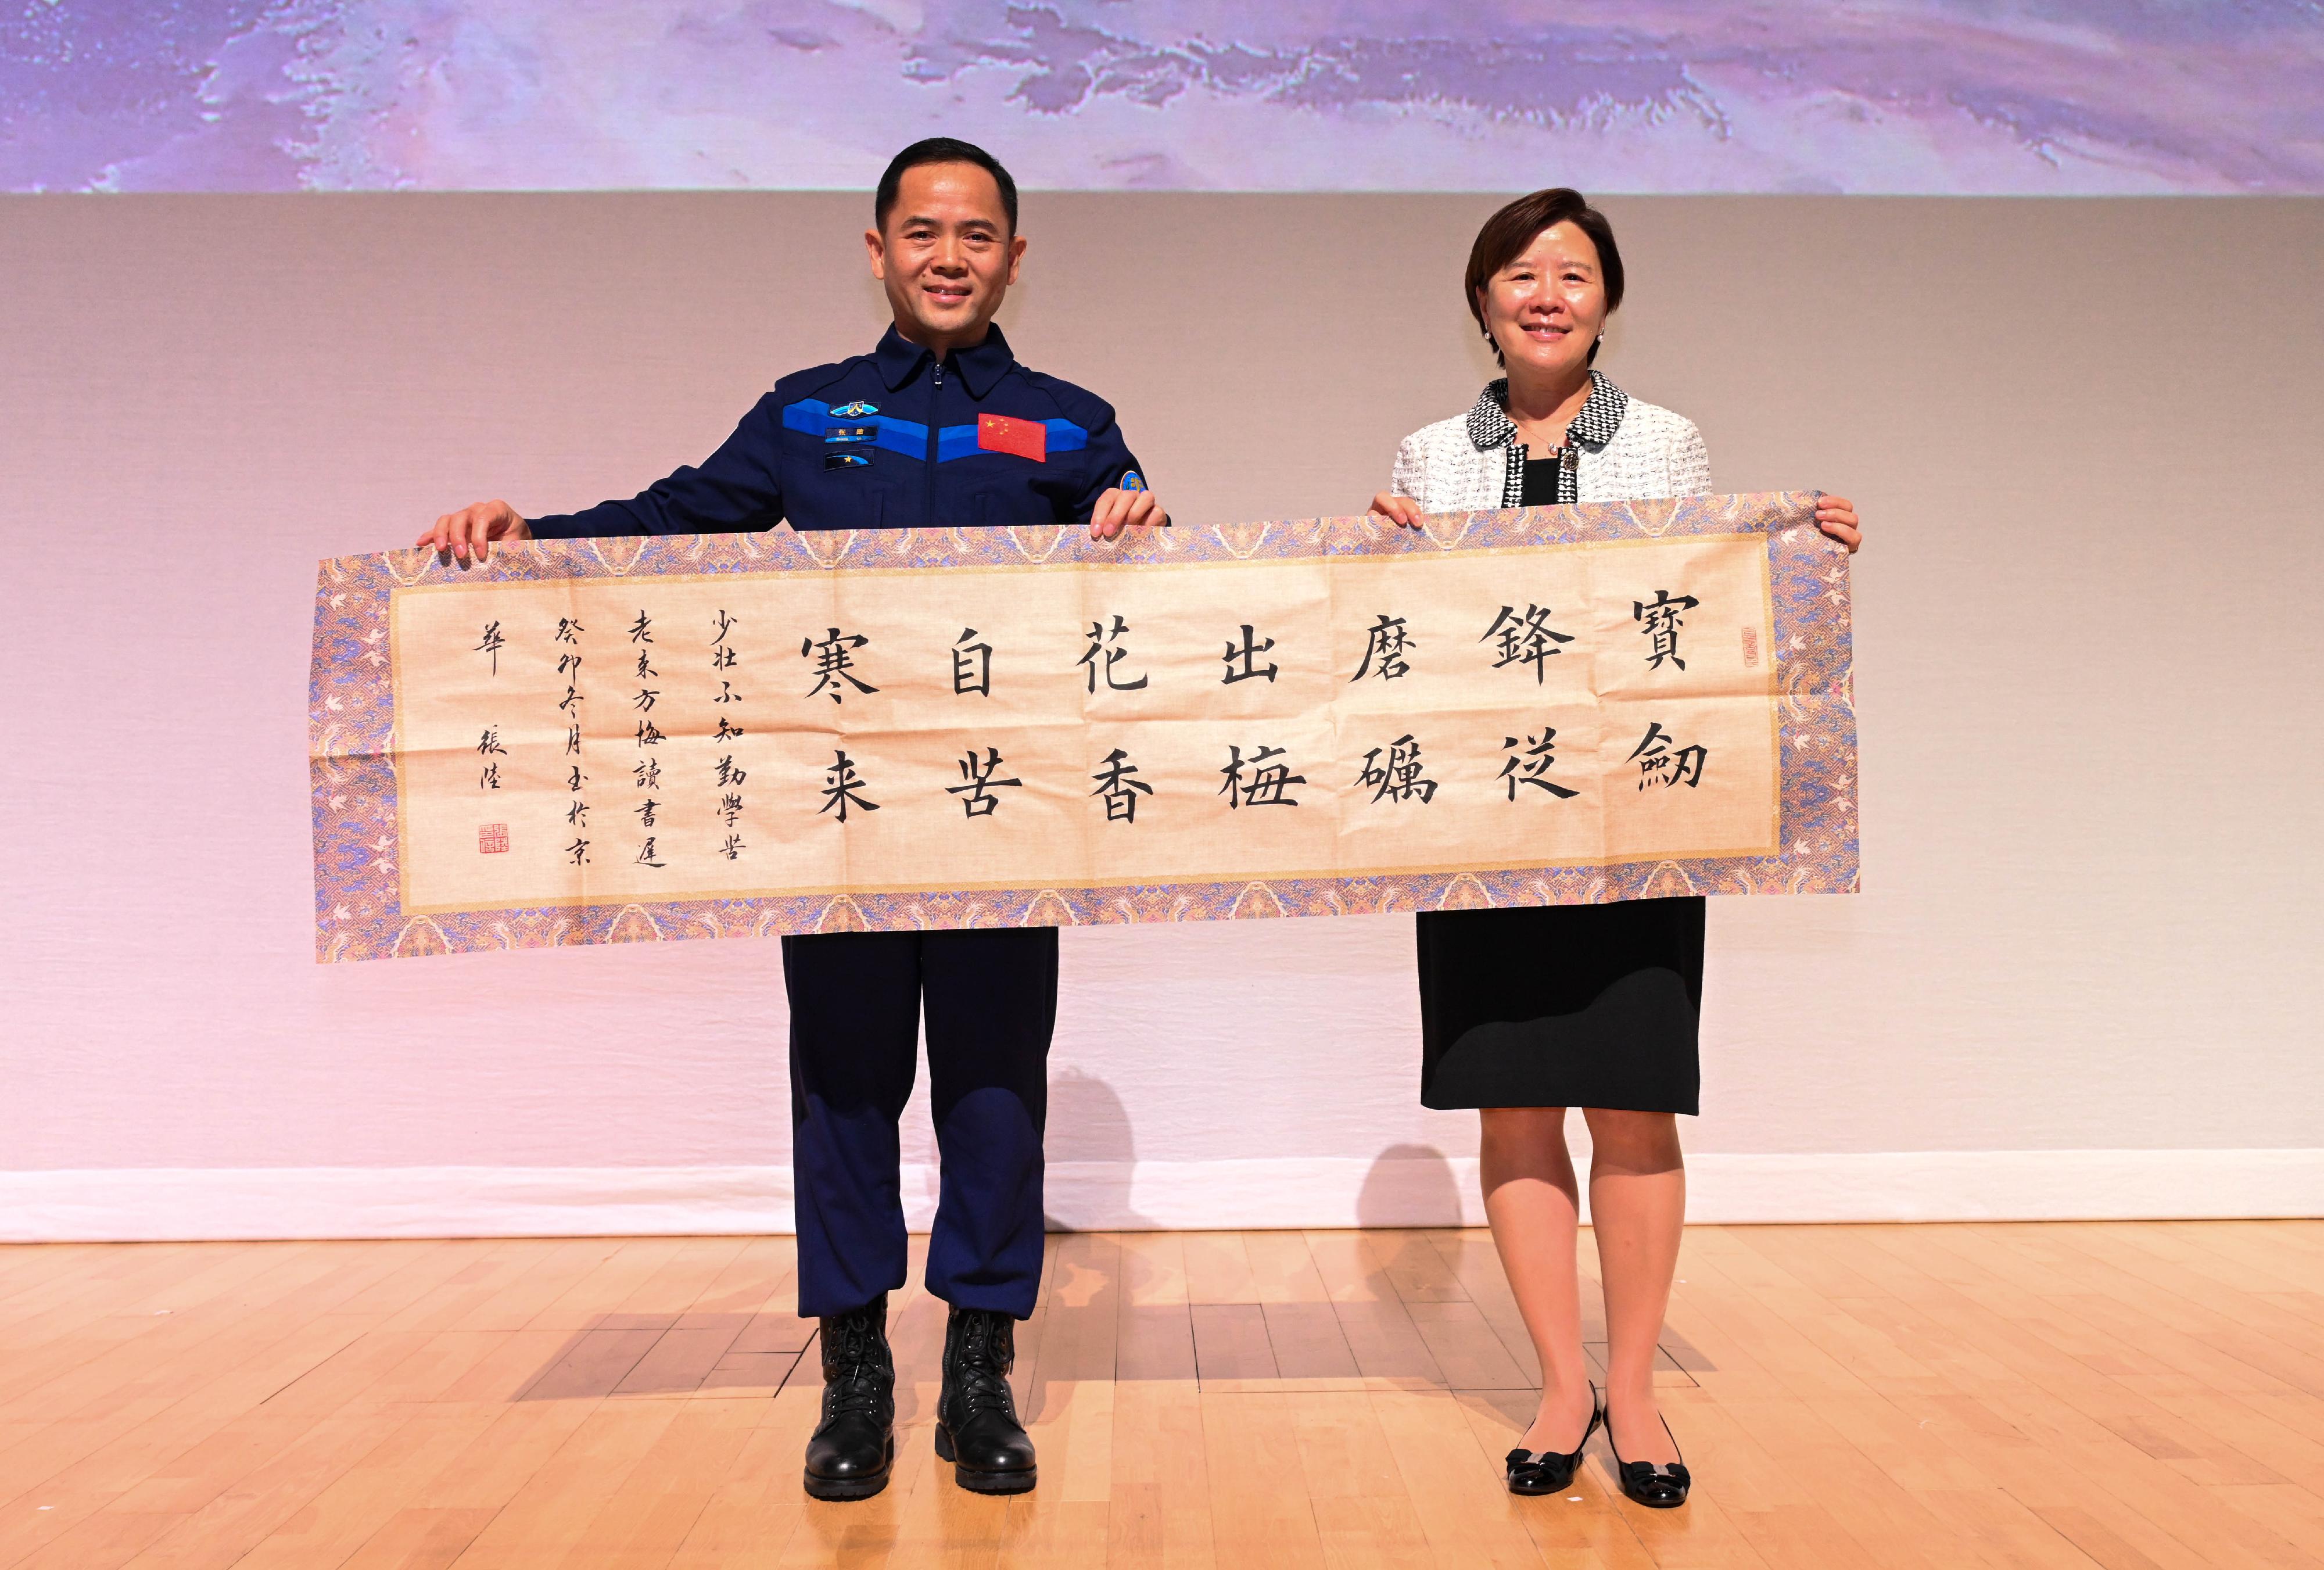 The China Manned Space delegation continued their visit to Hong Kong today (November 30). Photo shows Shenzhou-15 astronaut Mr Zhang Lu (left) and the President of the Hong Kong University of Science and Technology, Professor Nancy Ip (right), attending the dialogue session with teachers and students held at the Hong Kong University of Science and Technology.